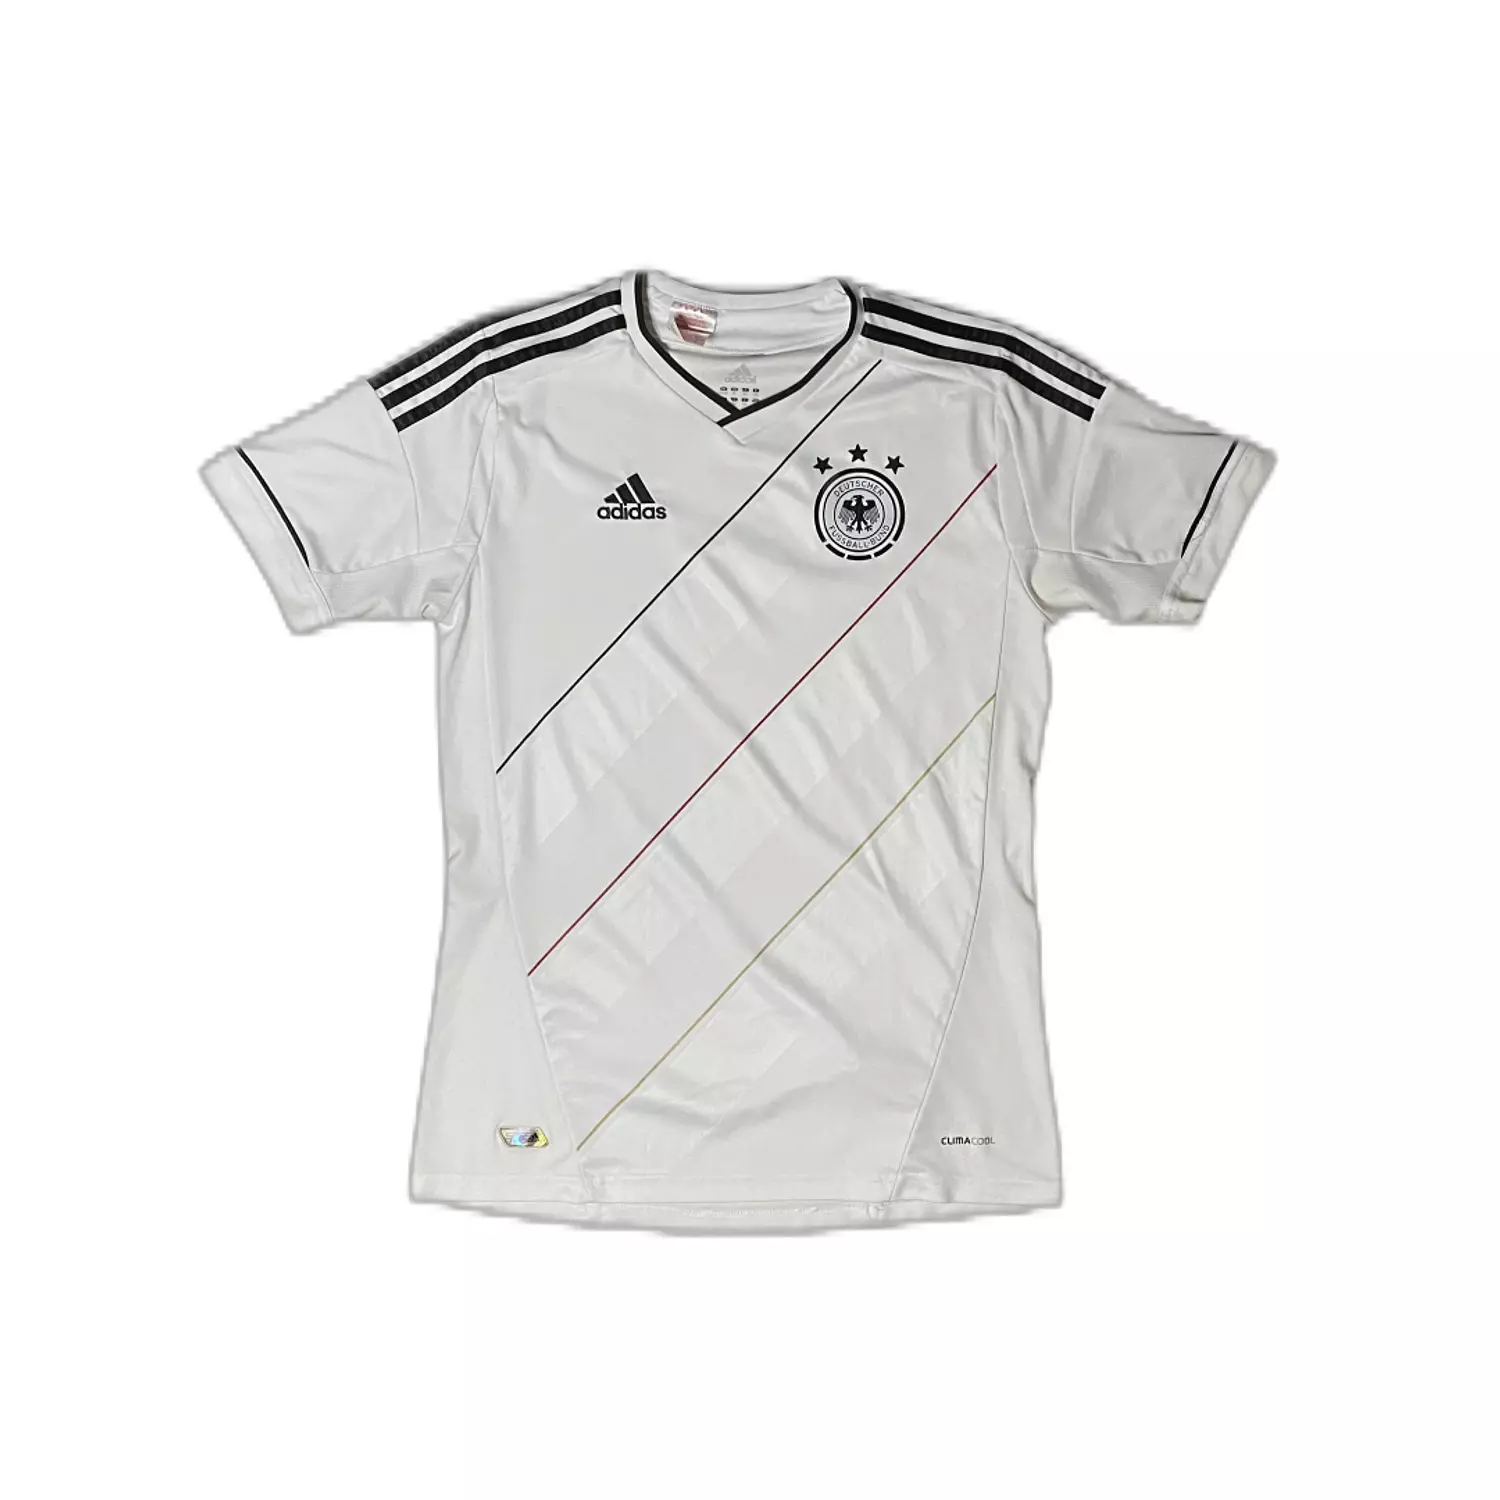 Germany 2012 Home Kit (S)  hover image